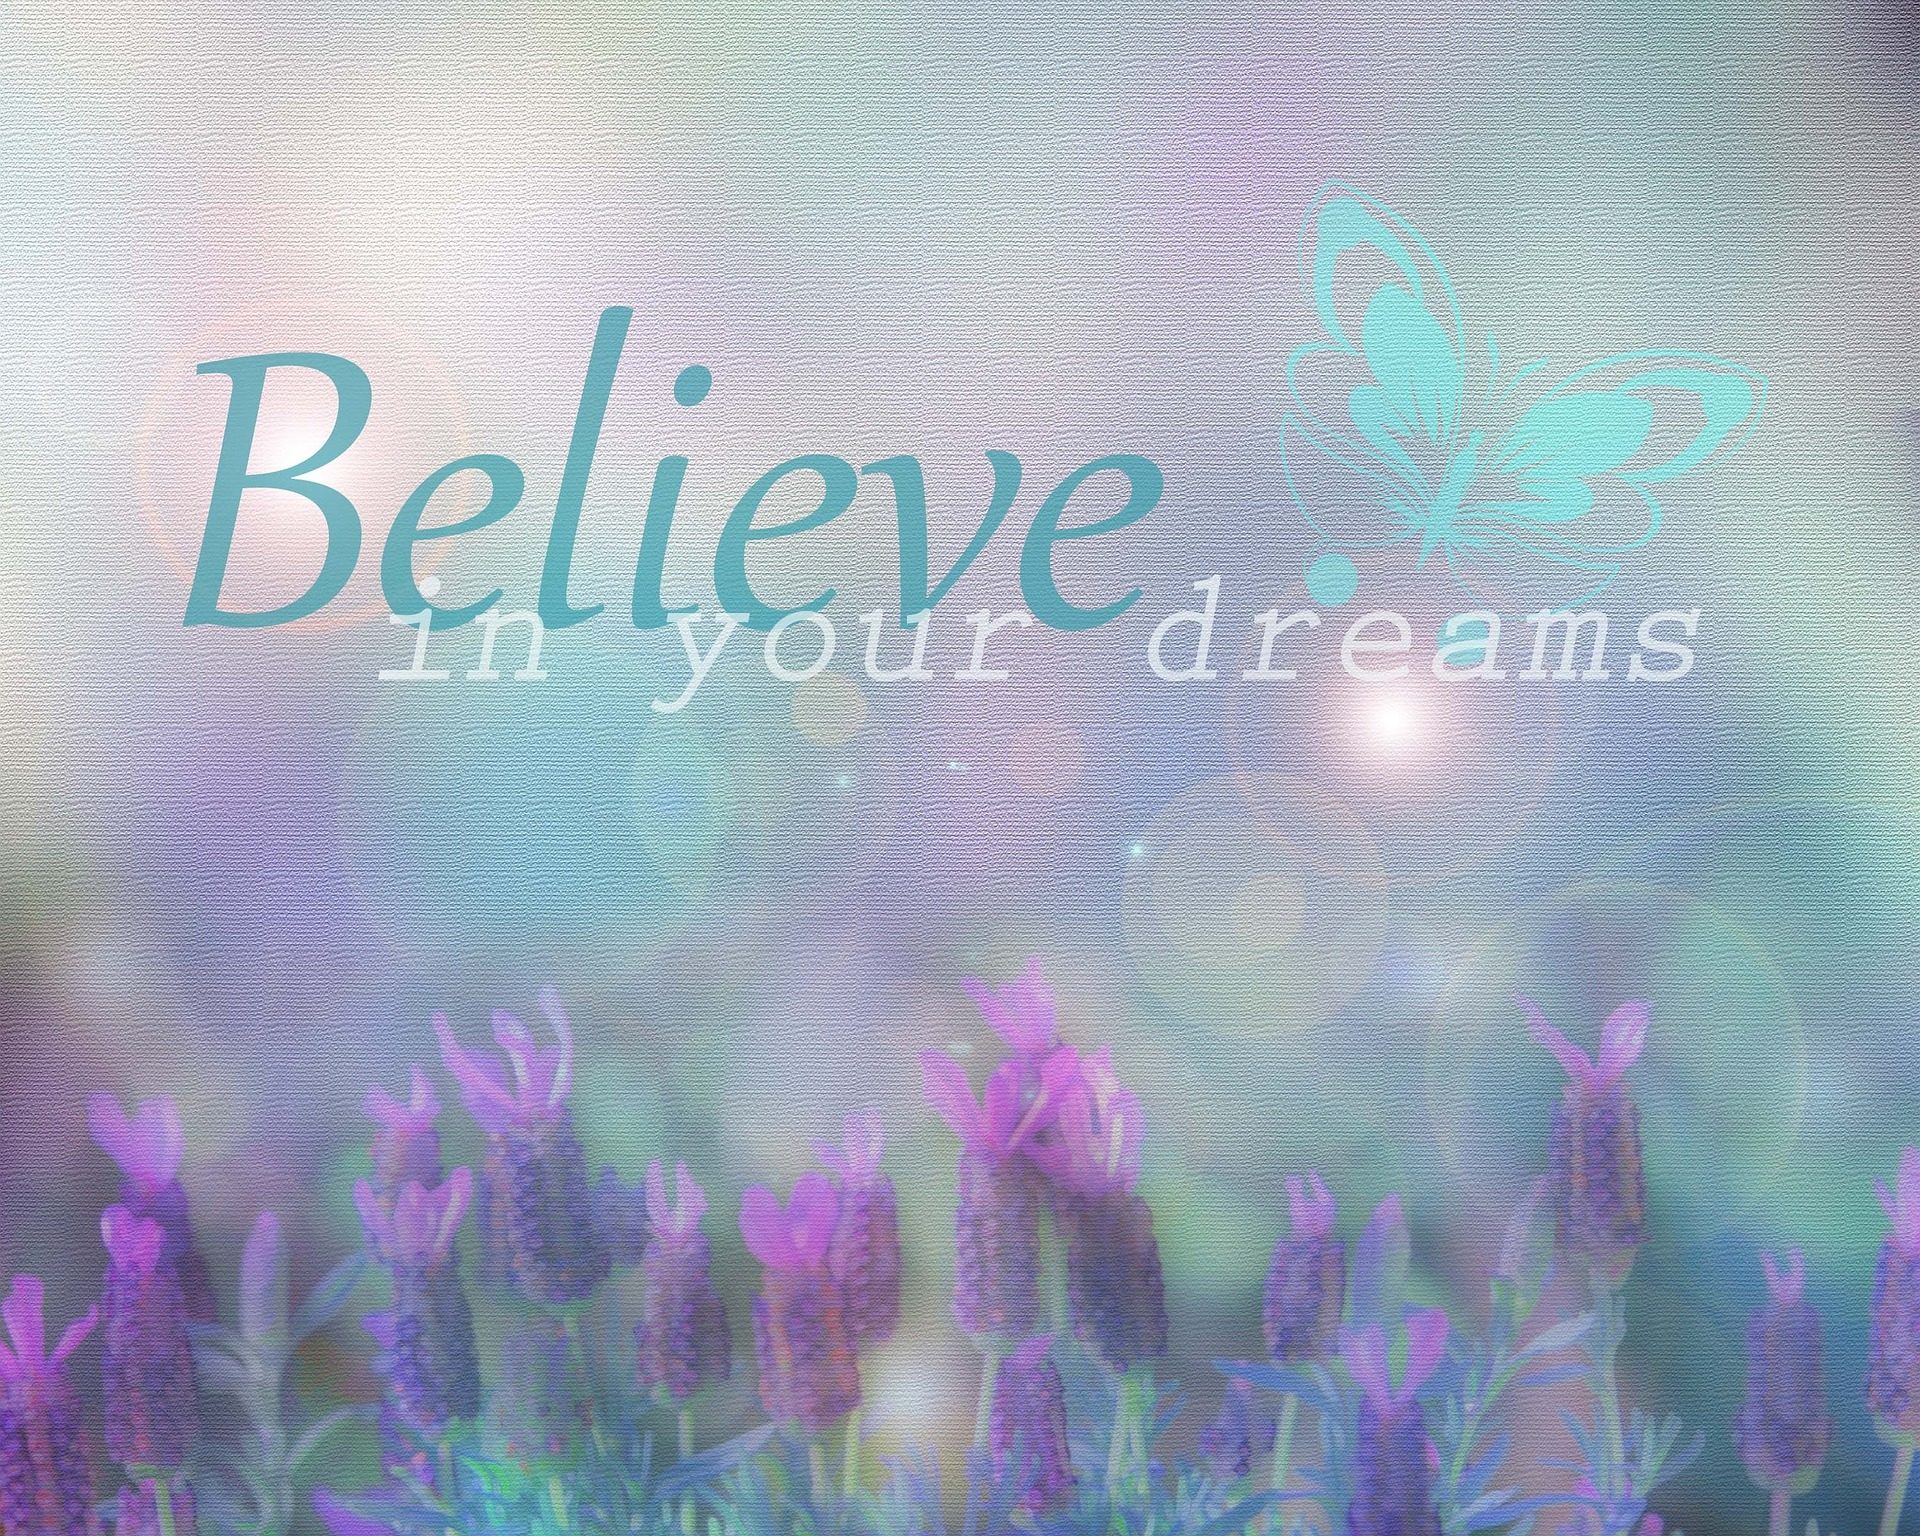 Best Wallpaper Of Success Quotes Believe In Your Dreams - Whatsapp Dp Image  For Latest - 1920x1536 Wallpaper 